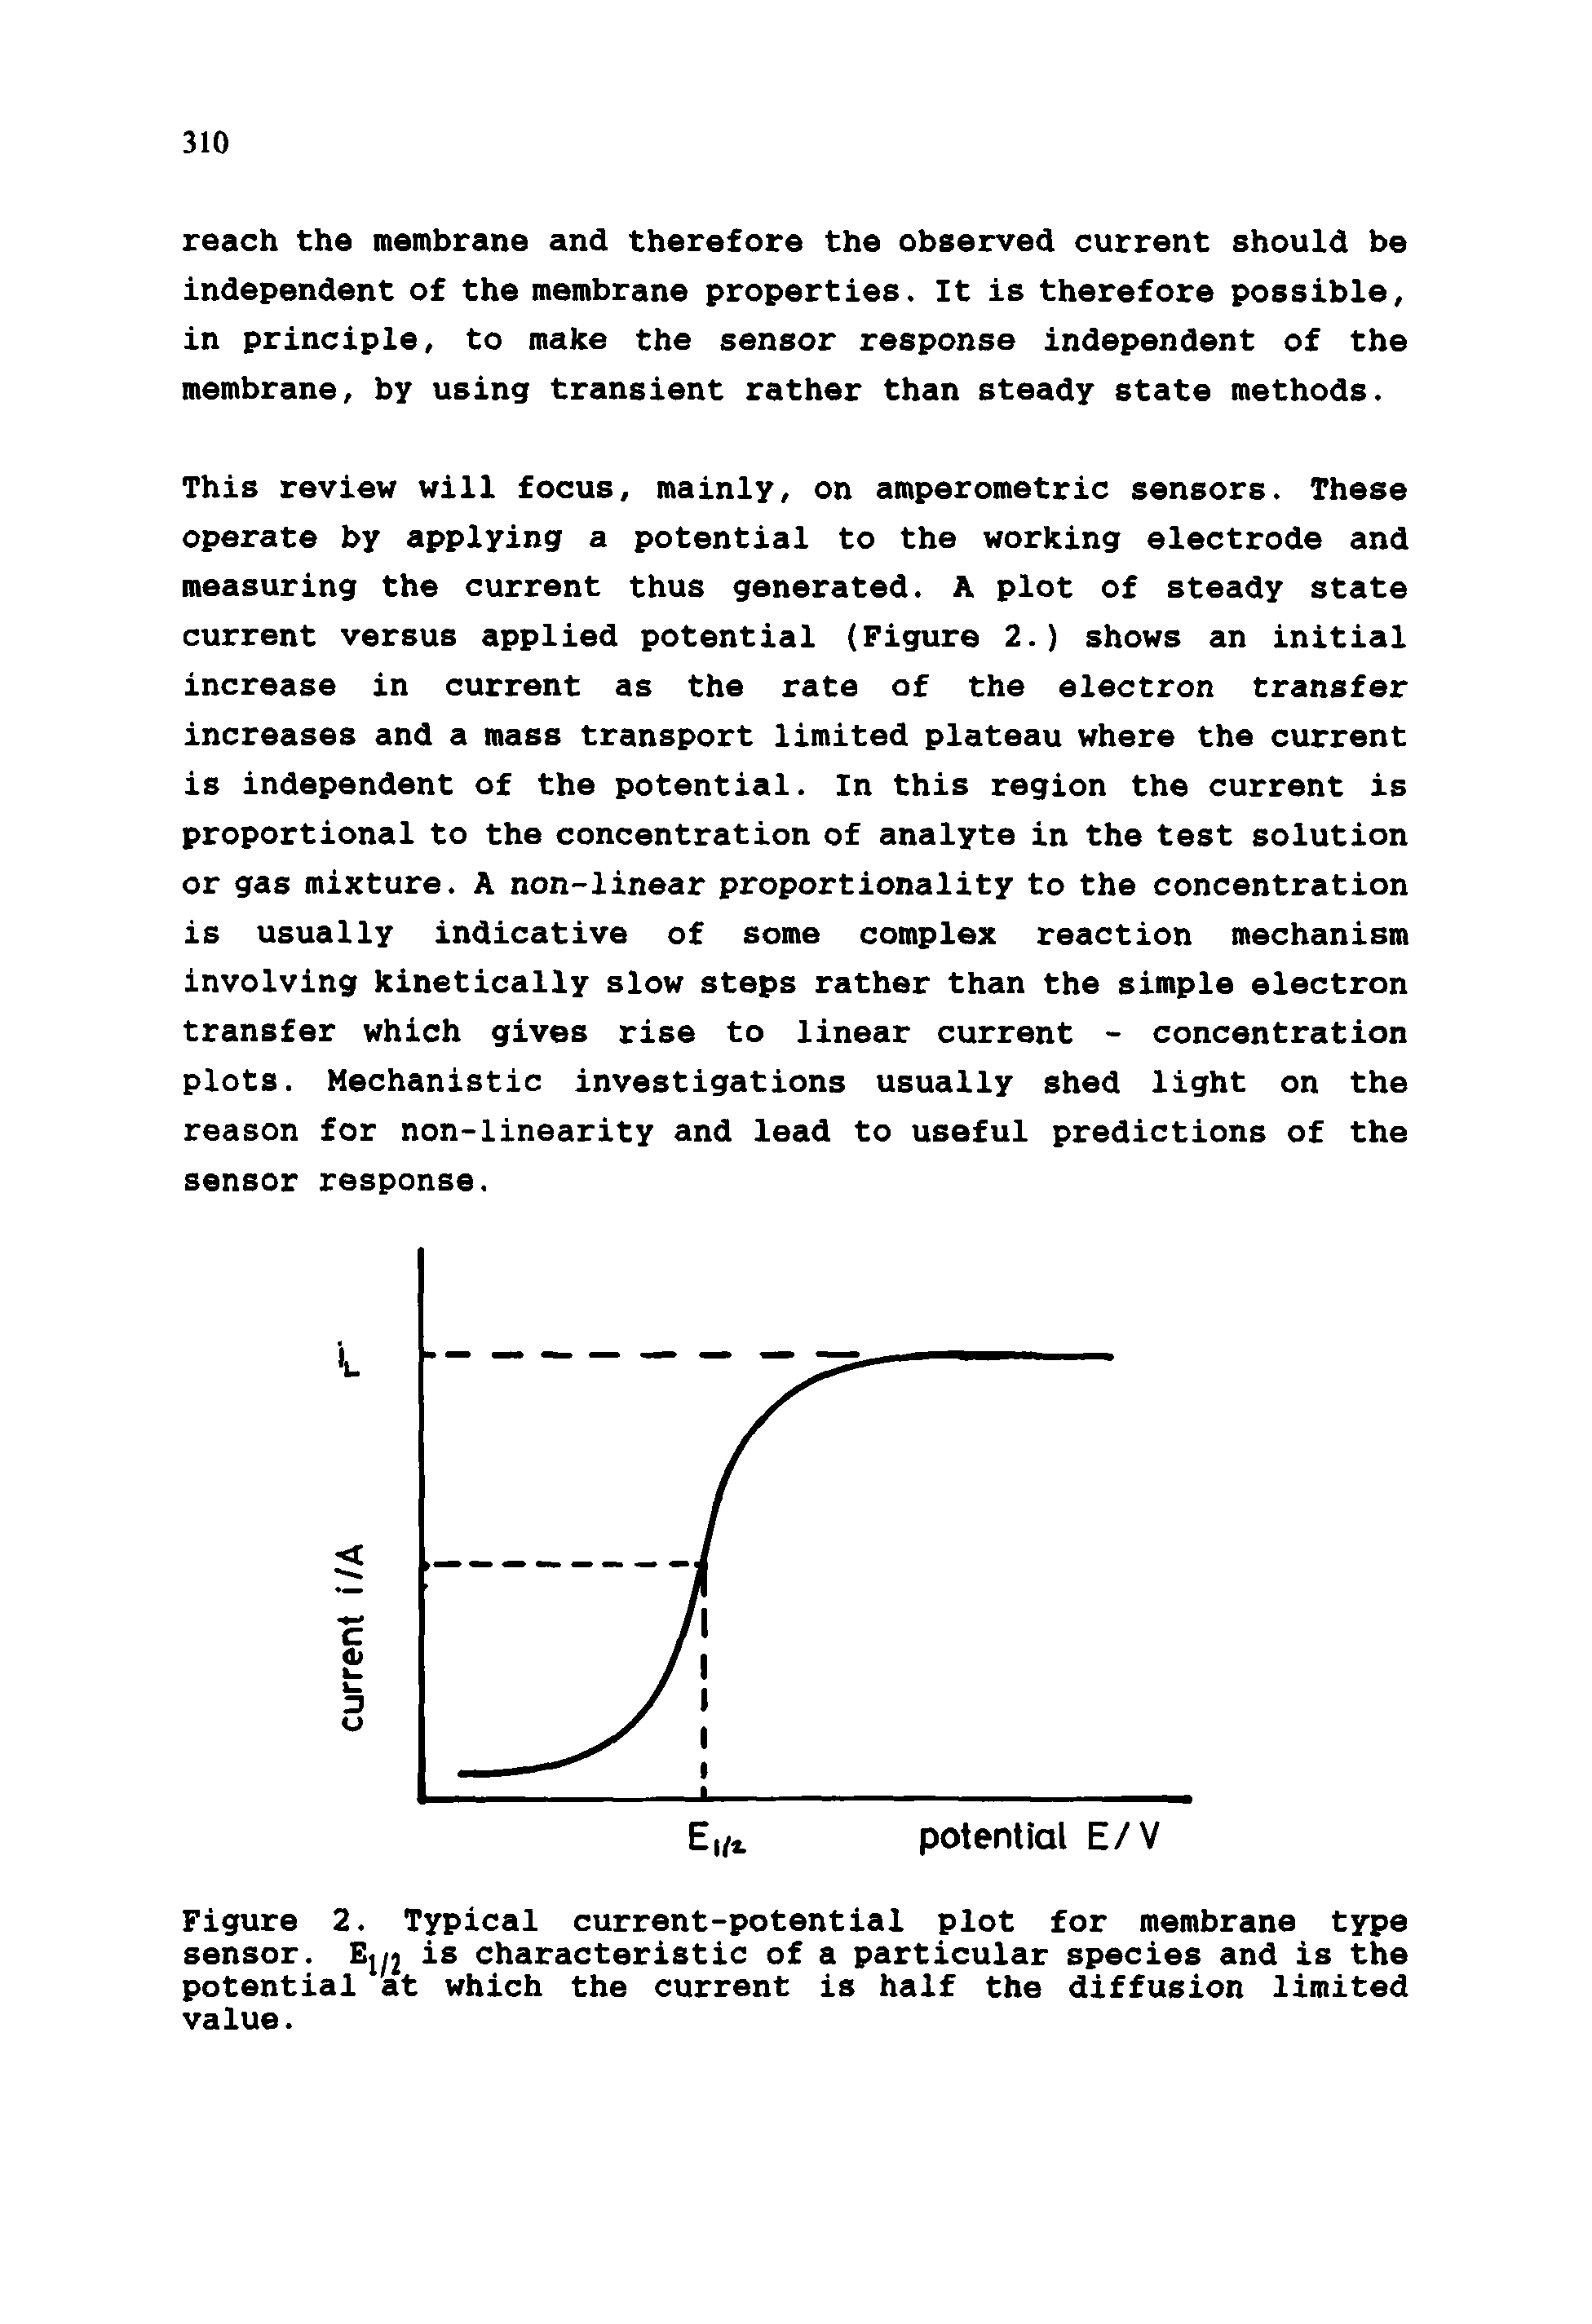 Figure 2. Typical current-potential plot for membrane type sensor. characteristic of a particular species and is the potential at which the current is half the diffusion limited value.